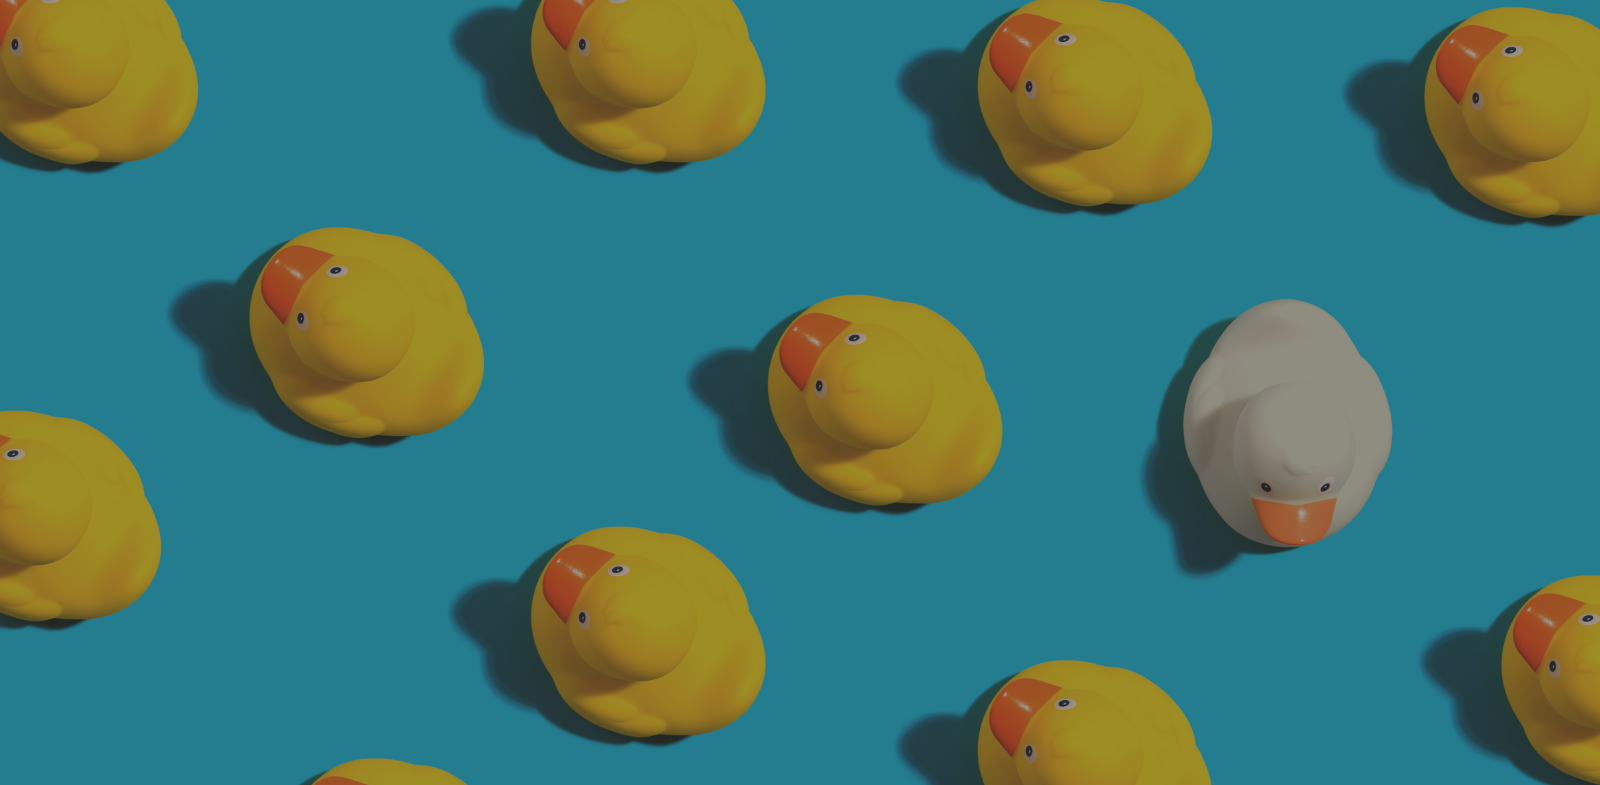 Ten yellow rubber ducks on blue background with one white rubber duck